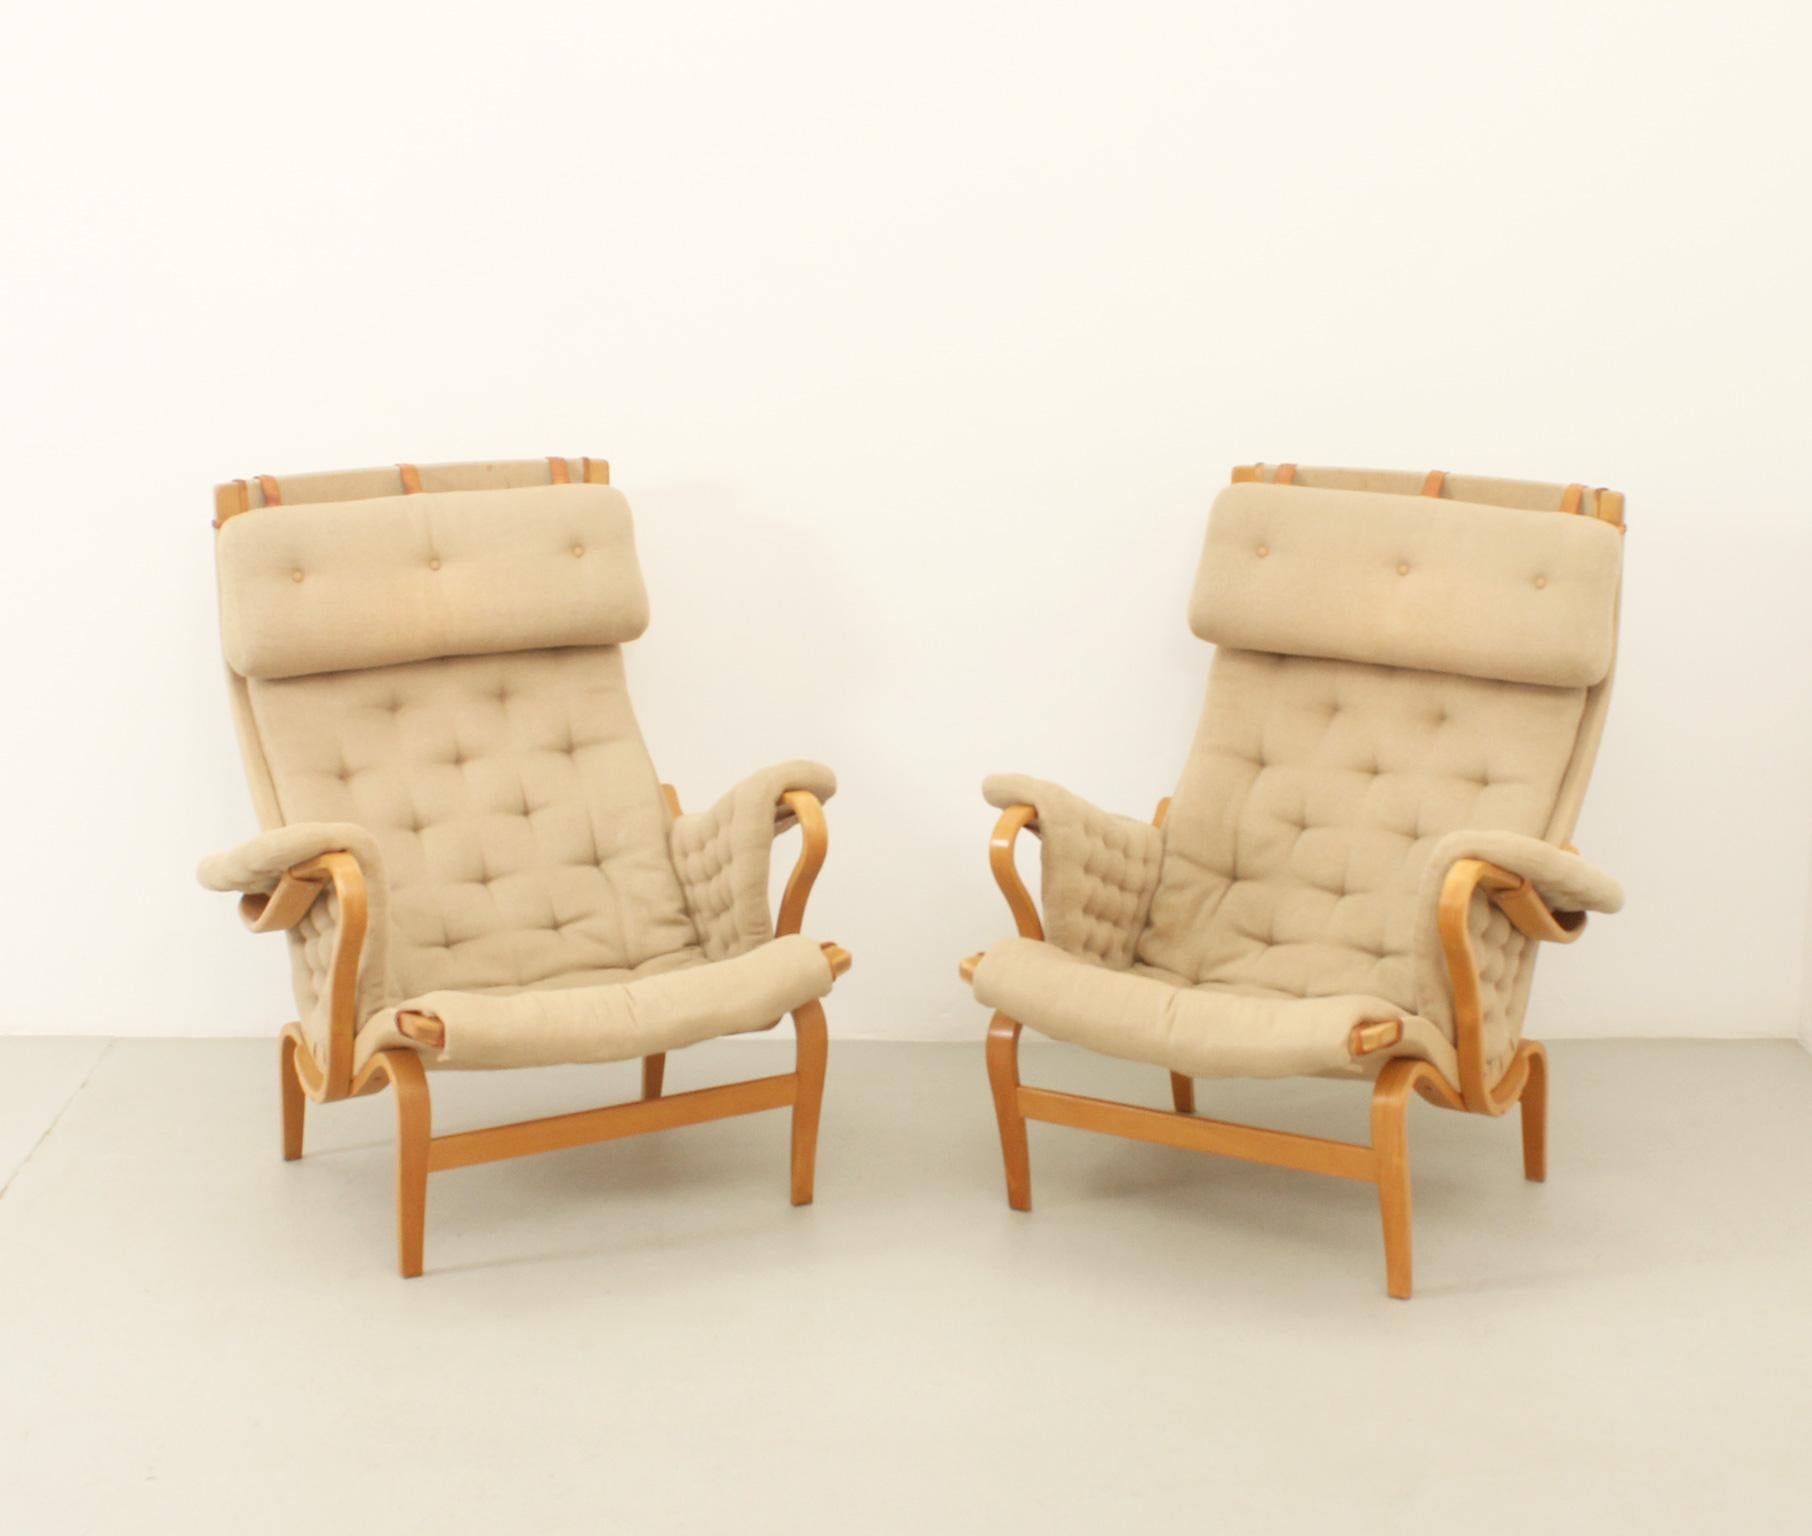 Swedish Pair of Pernilla Armchairs by Bruno Mathsson for Dux, 1969 For Sale